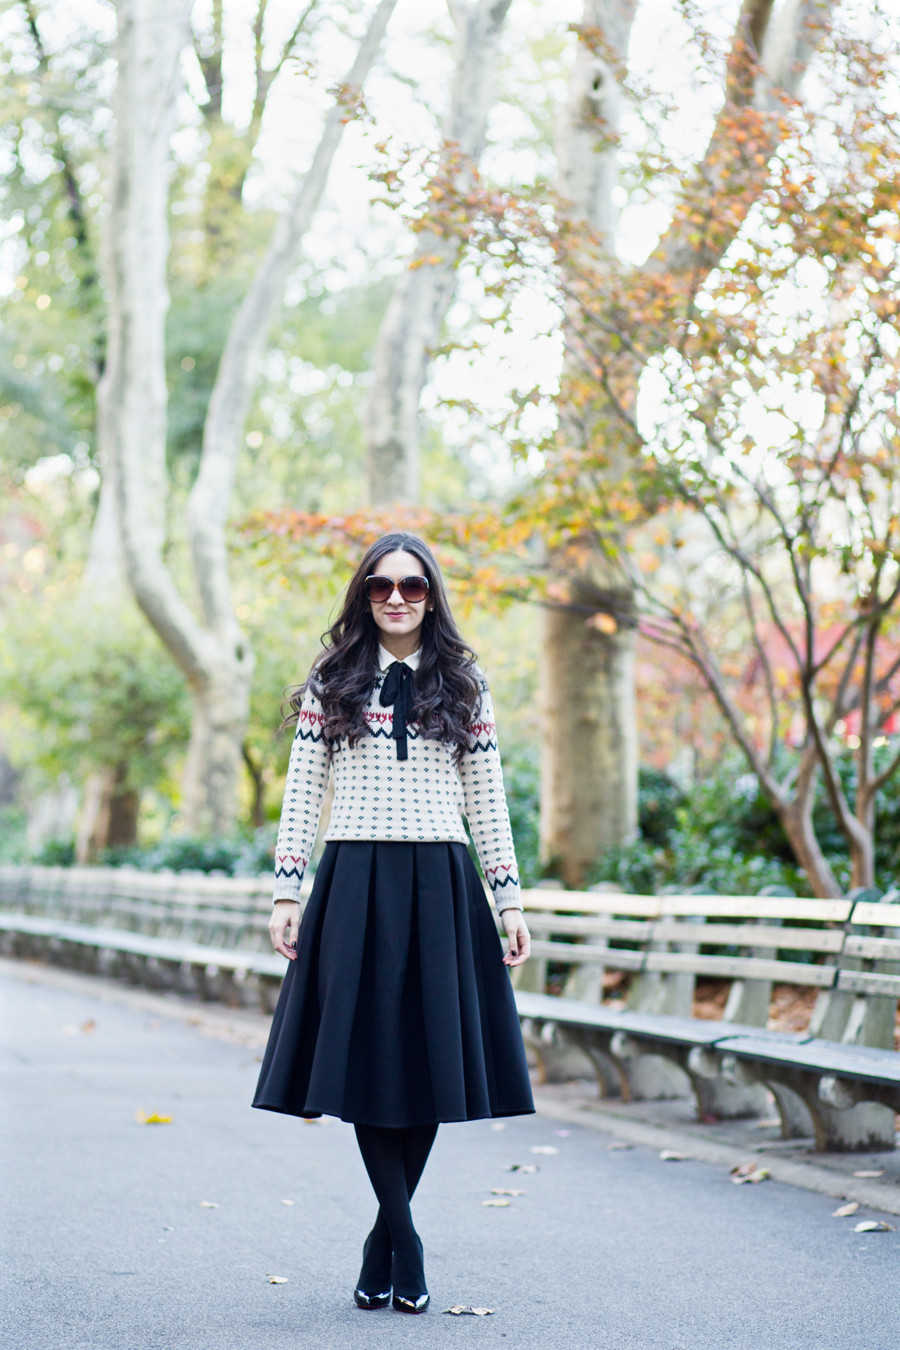 FACTORY WARMSPUN DOTTED FAIR ISLE SWEATER, J.Crew Factory Fair Isle Sweater, J.Crew Factory Crewneck Sweater,  ASOS Premium Full Midi Skirt in Bonded Crepe in Black, Asos Full Skirt, Asos Black Midi Skirt, Christian Louboutin Pigalle 120 mm in Black Patent Leather, Christian Louboutin Pigalle Heels,  H&M Crepe Blouse, Black and White Bow Blouse, Winter Outfit, Fair isle Outfit